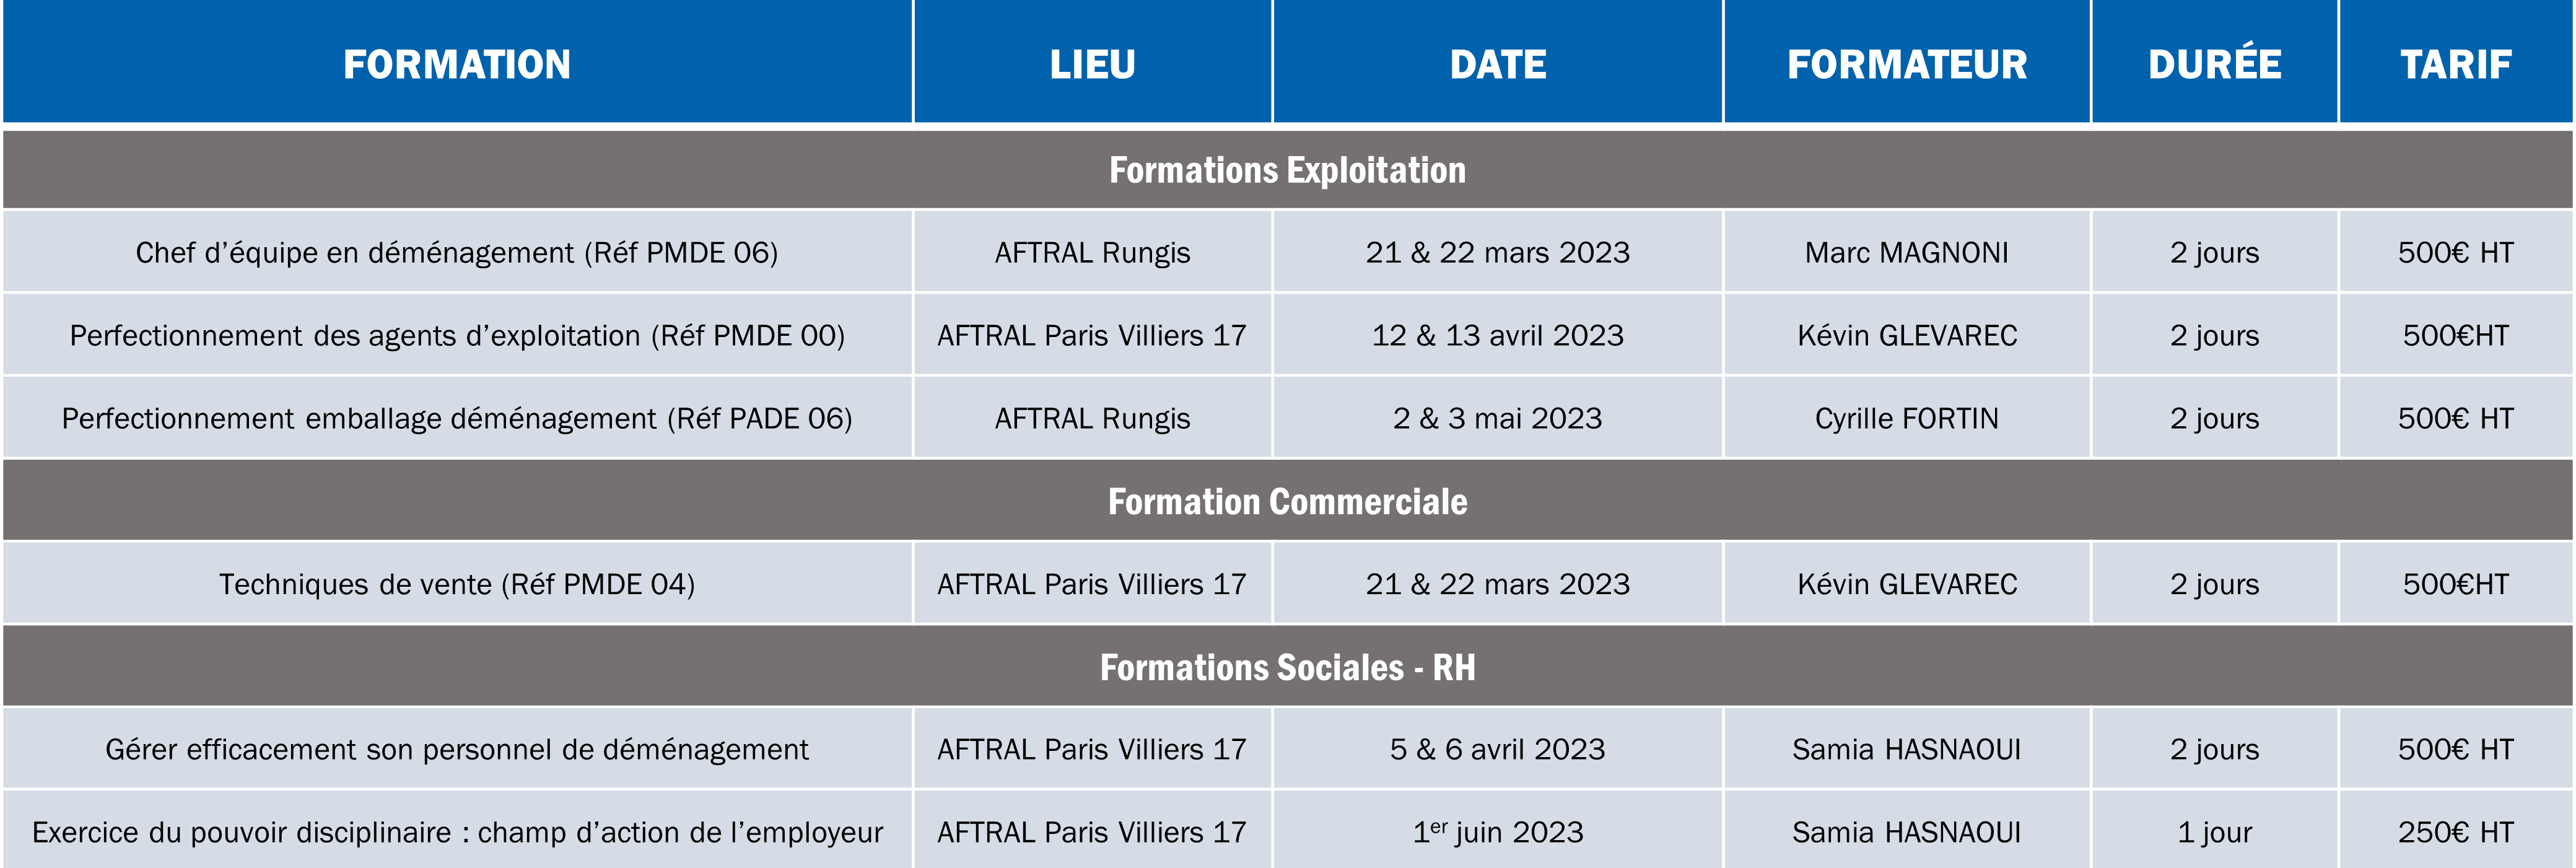 Calendrier formations 2023